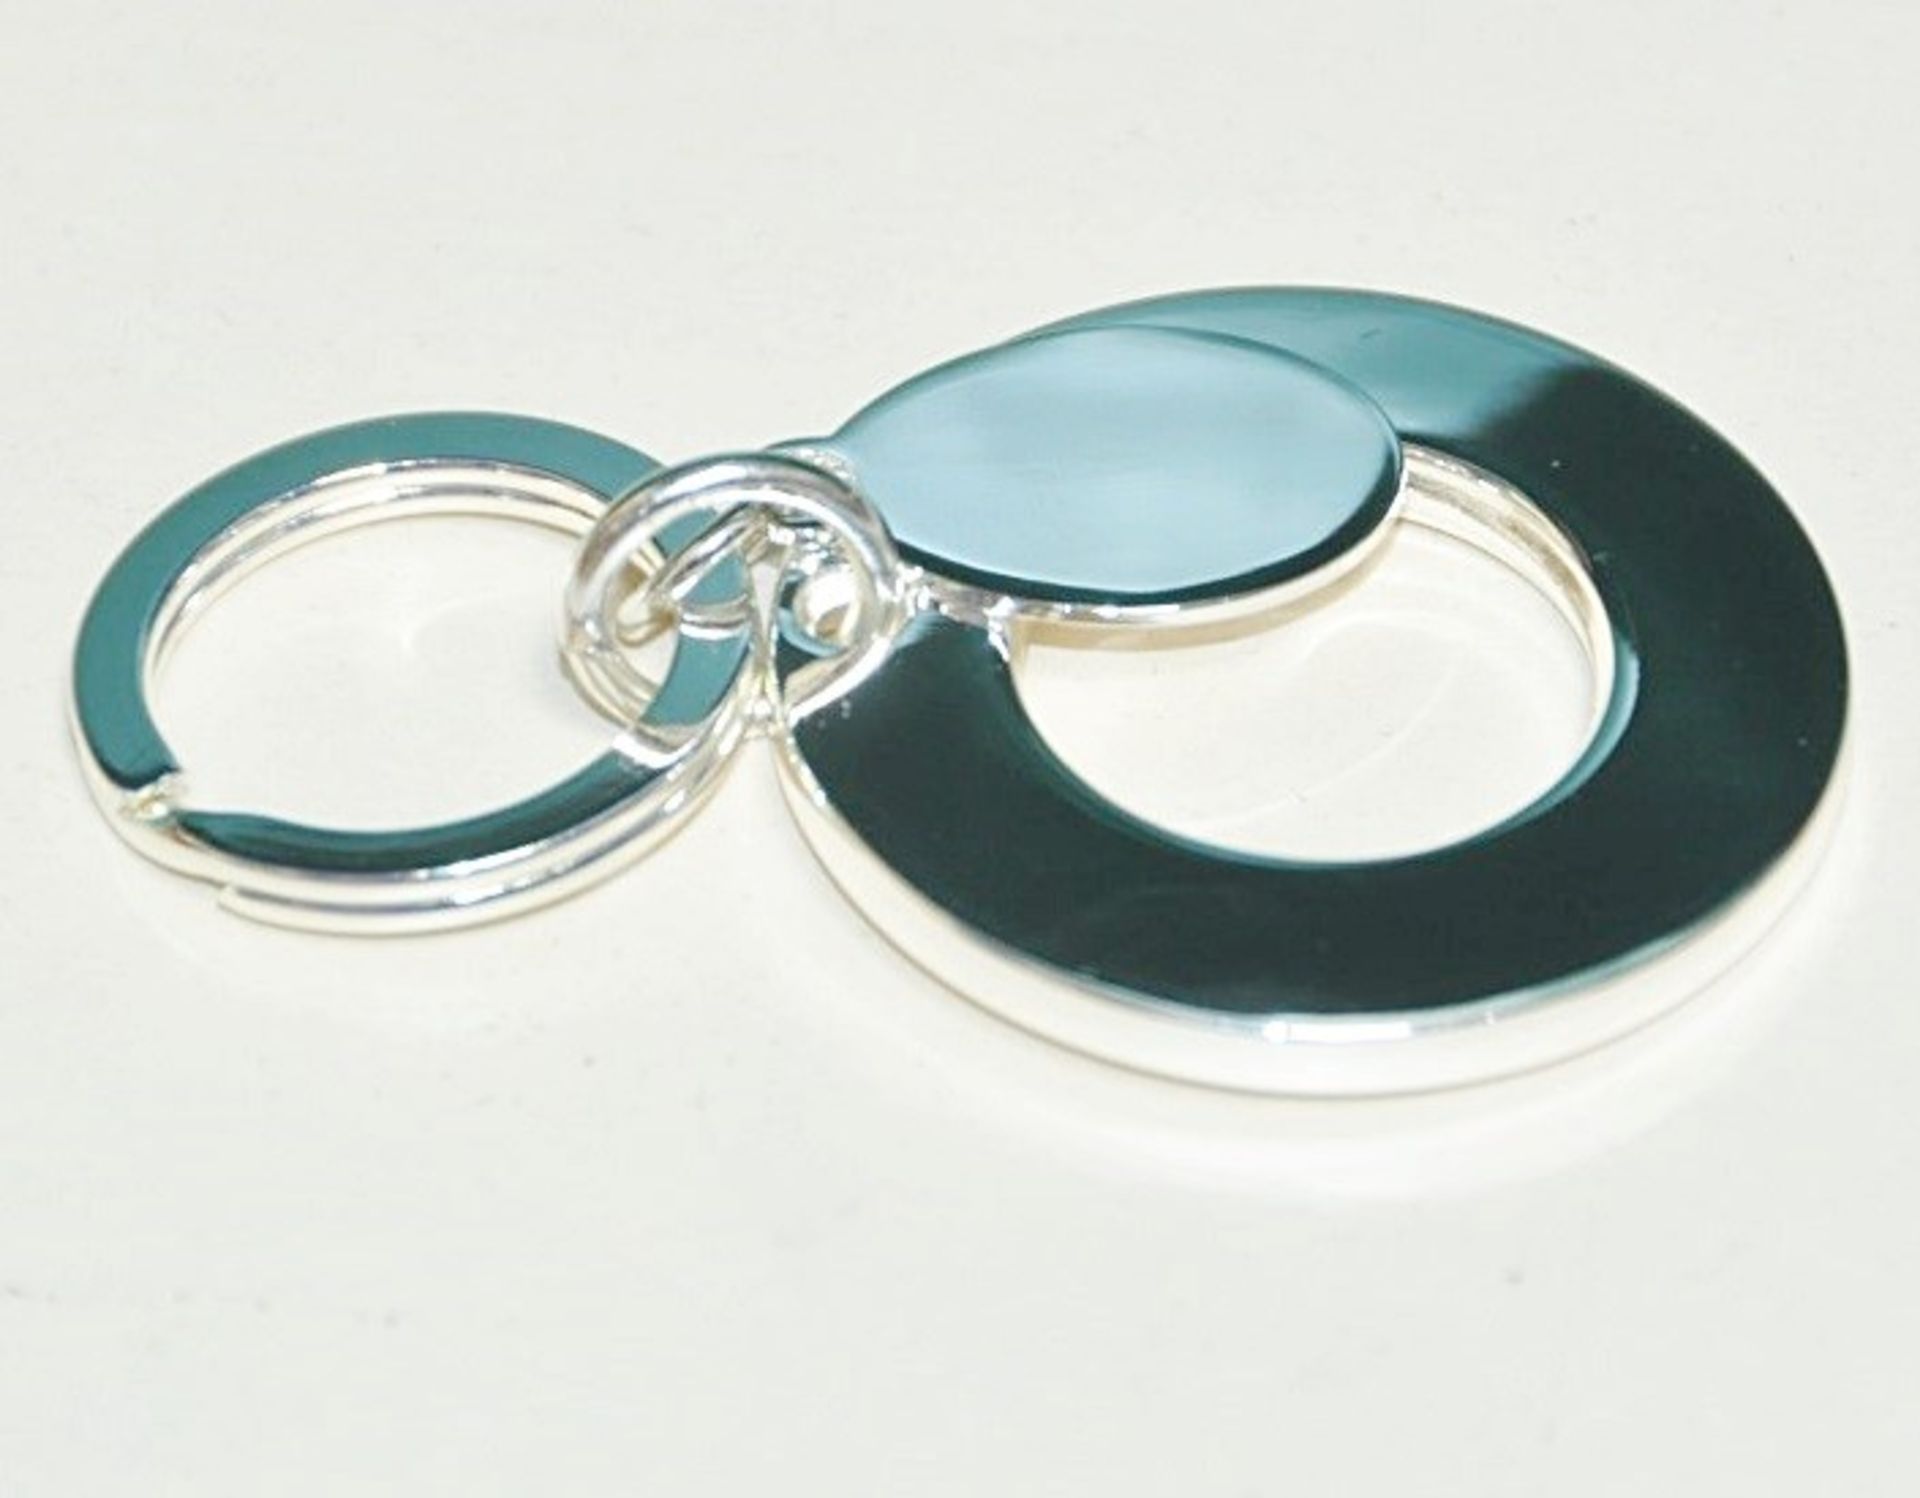 50 x Silver Plated Key Rings By ICE London - Design: SOLAR - MADE WITH "SWAROVSKI¨ ELEMENTS - Luxury - Bild 3 aus 4